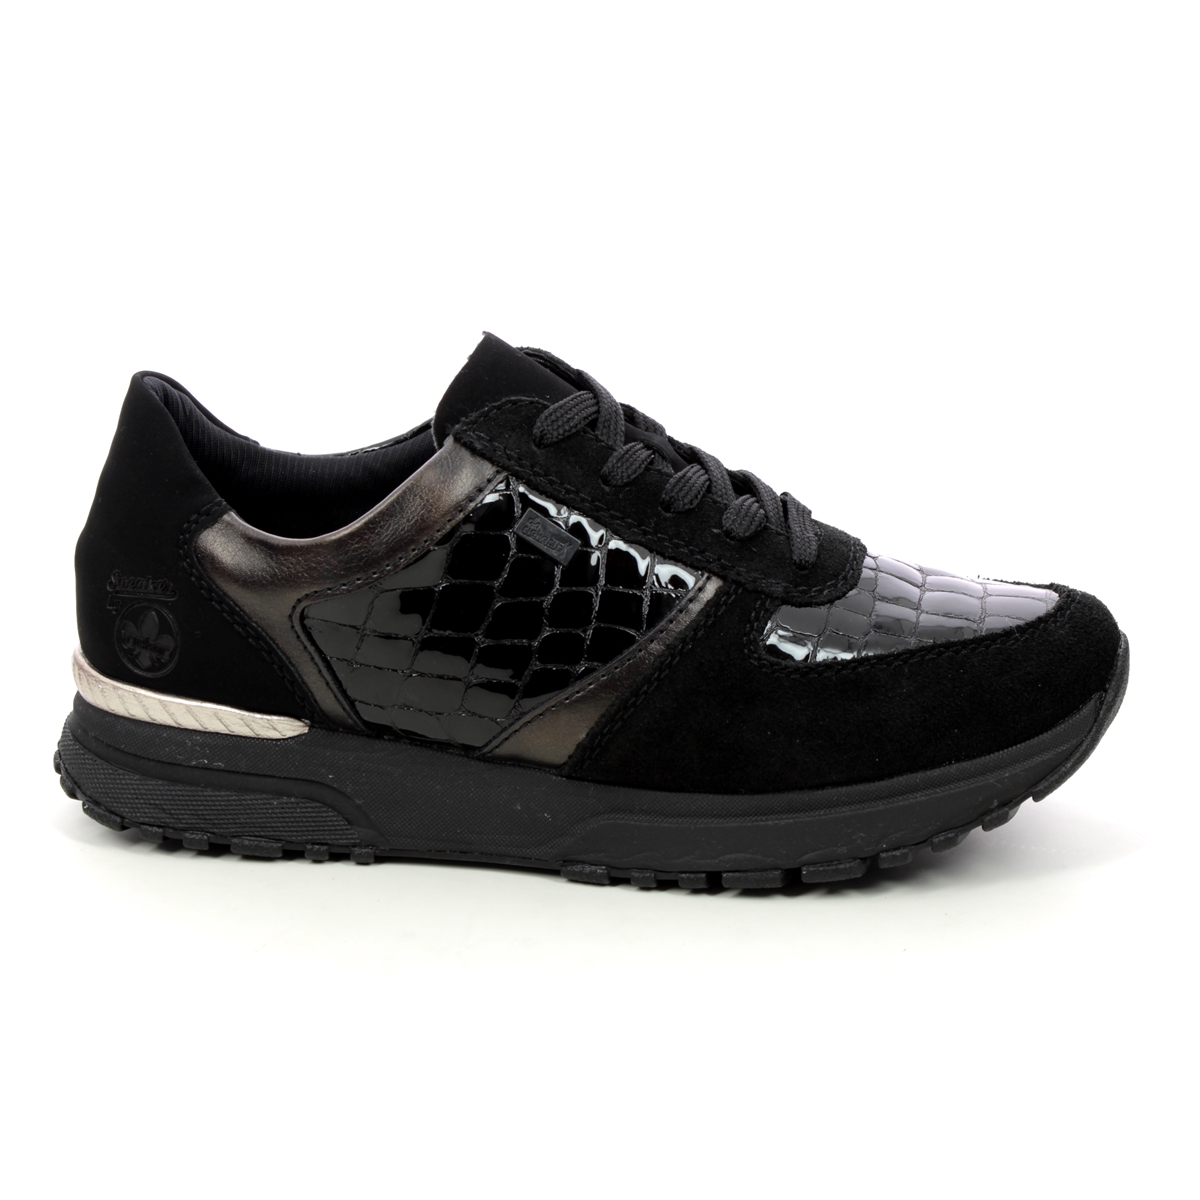 Rieker N7412-00 Black patent suede Womens trainers